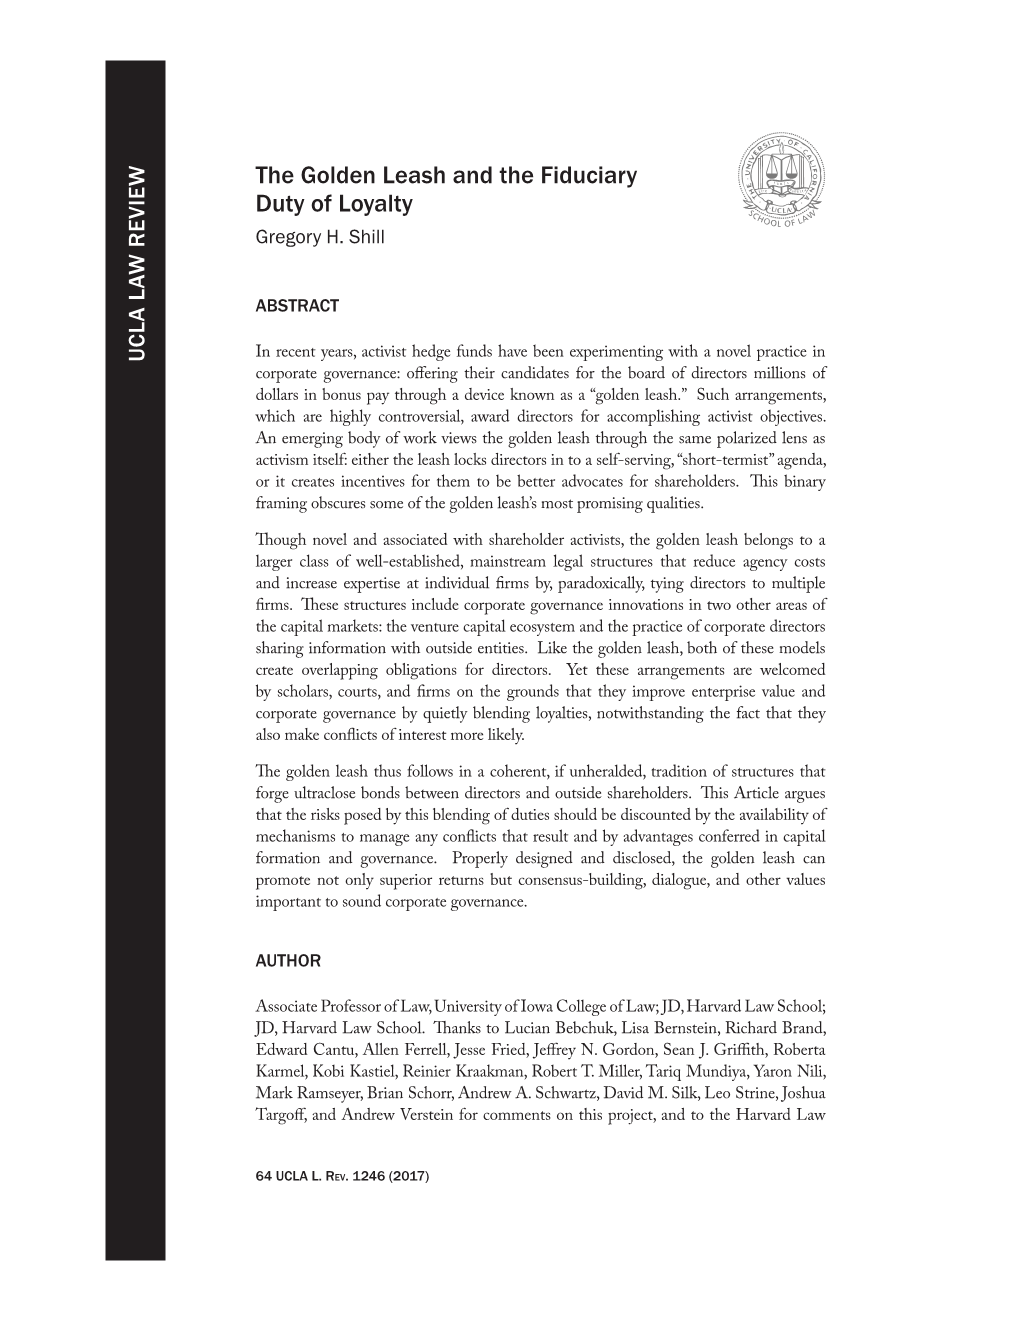 The Golden Leash and the Fiduciary Duty of Loyalty Gregory H